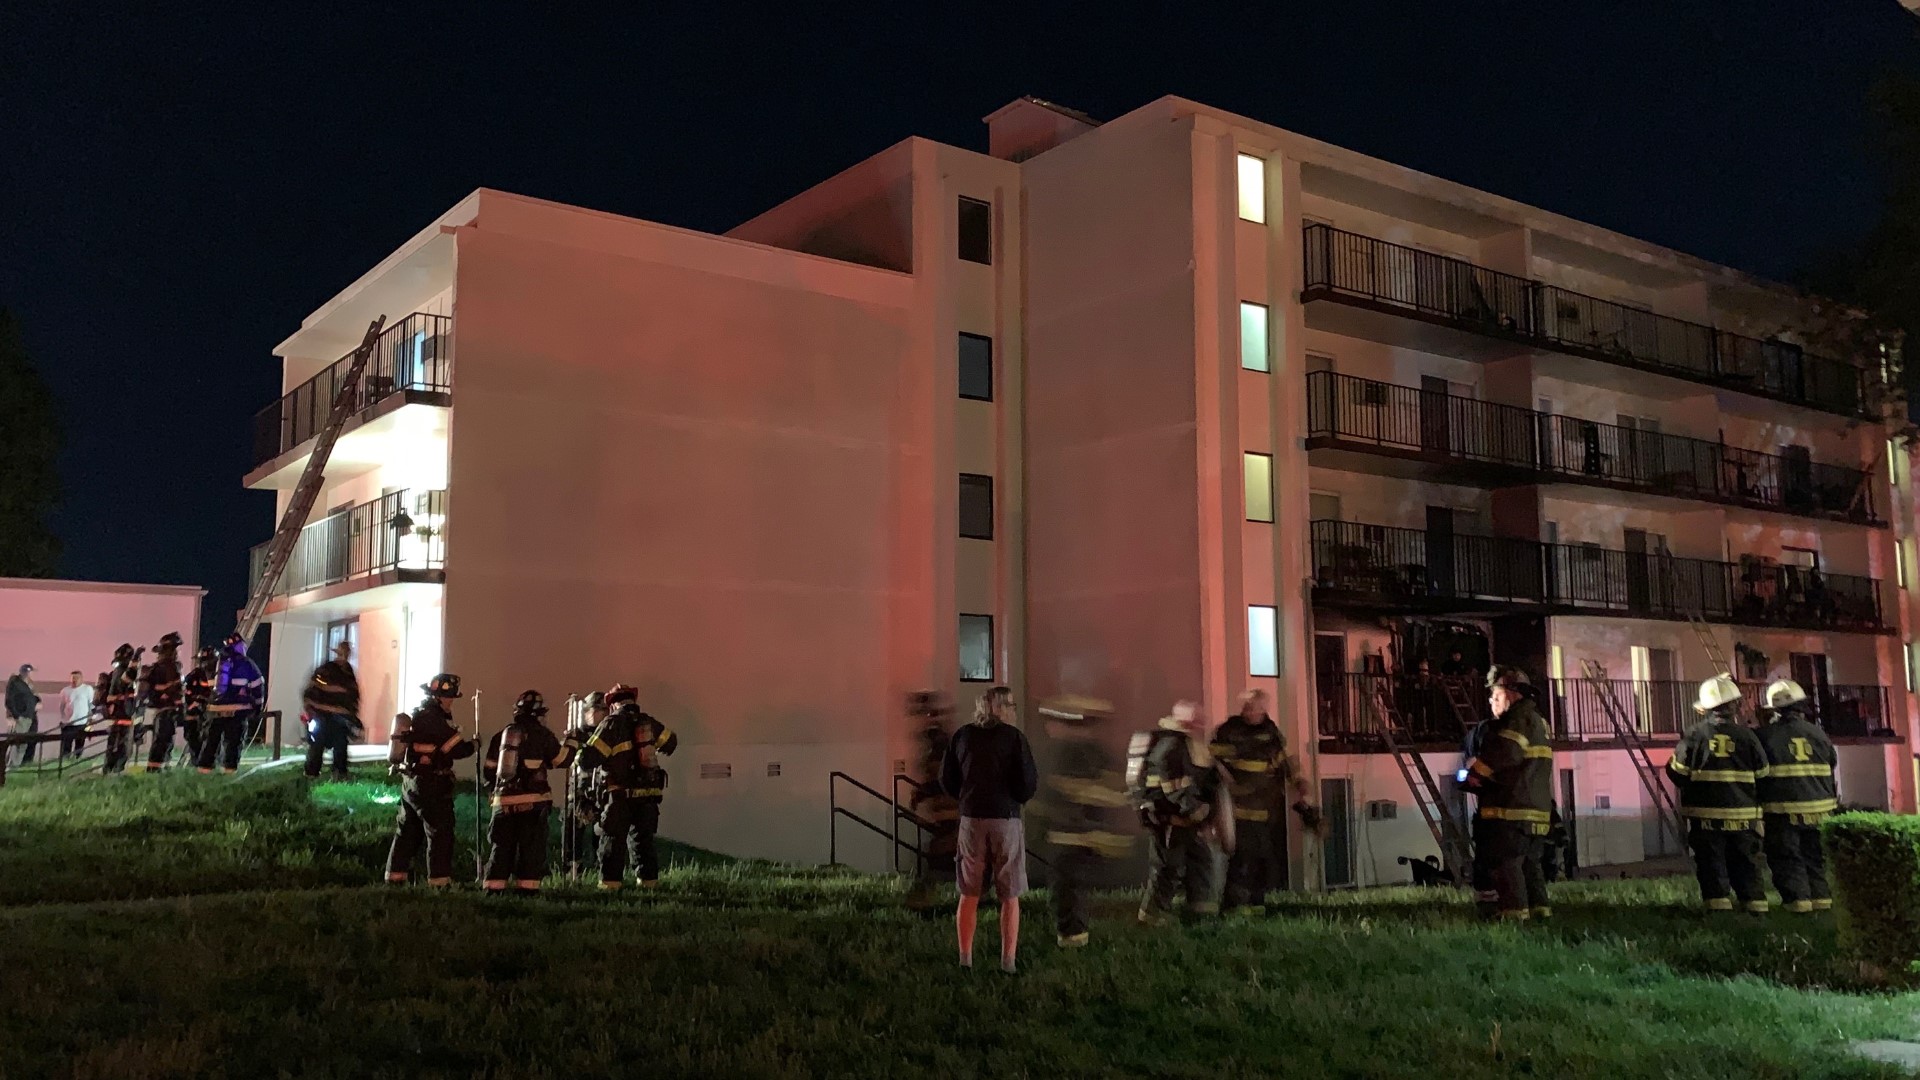 Fire crews were called to the El Dorado Apartments, just east of Indianapolis Motor Speedway, shortly after 3:30 a.m. Monday.